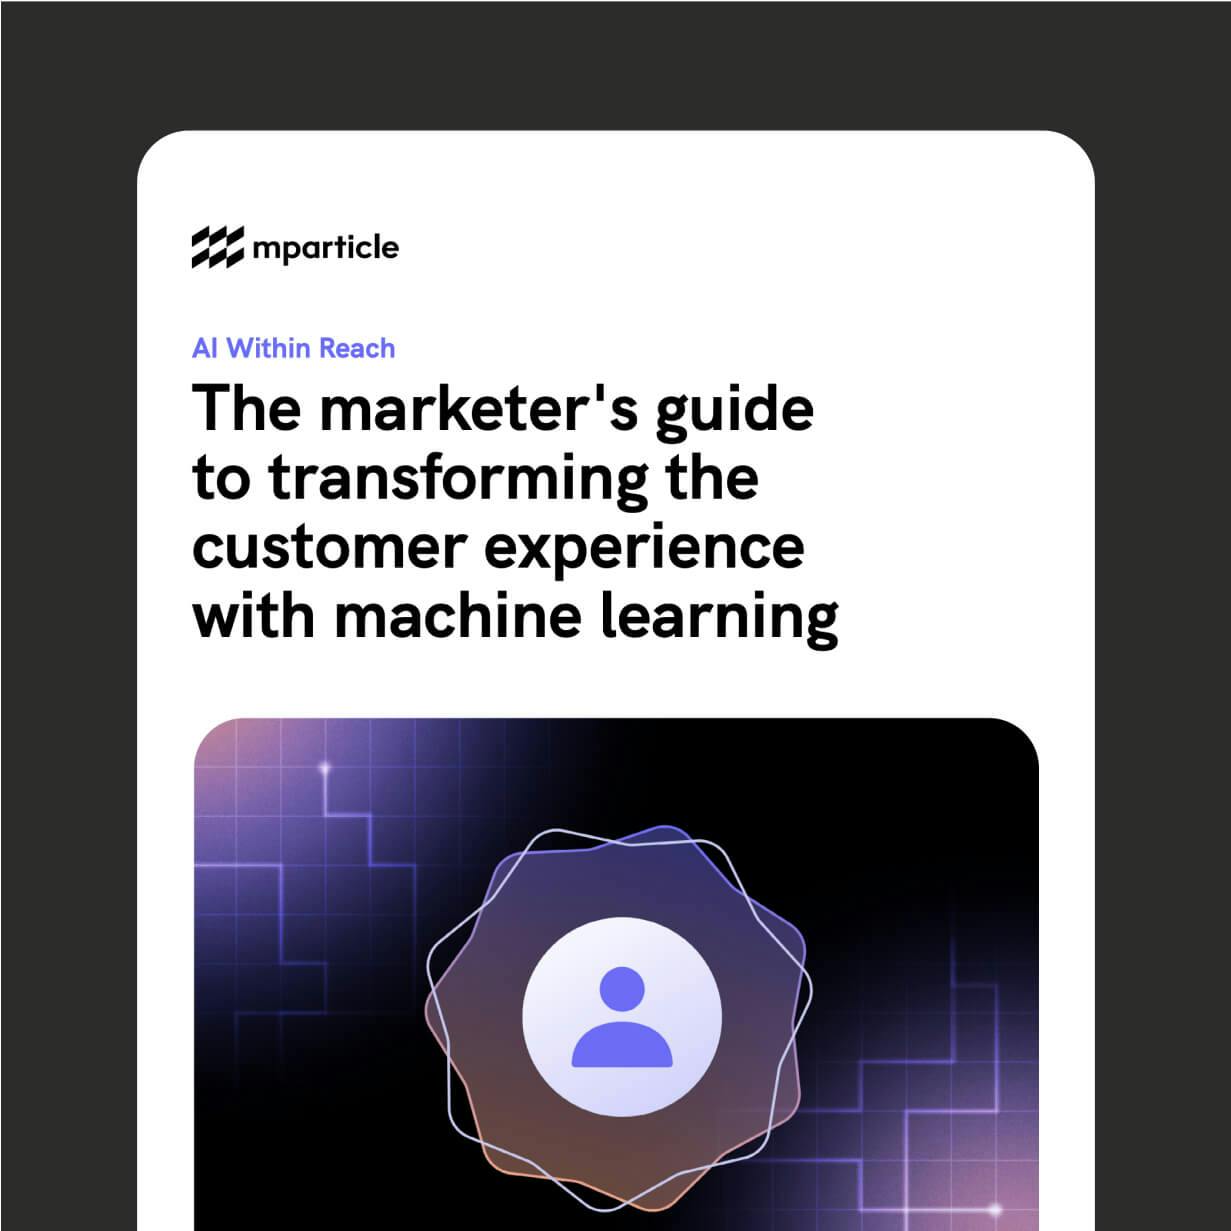 The marketer's guide to transforming the customer experience with machine learning